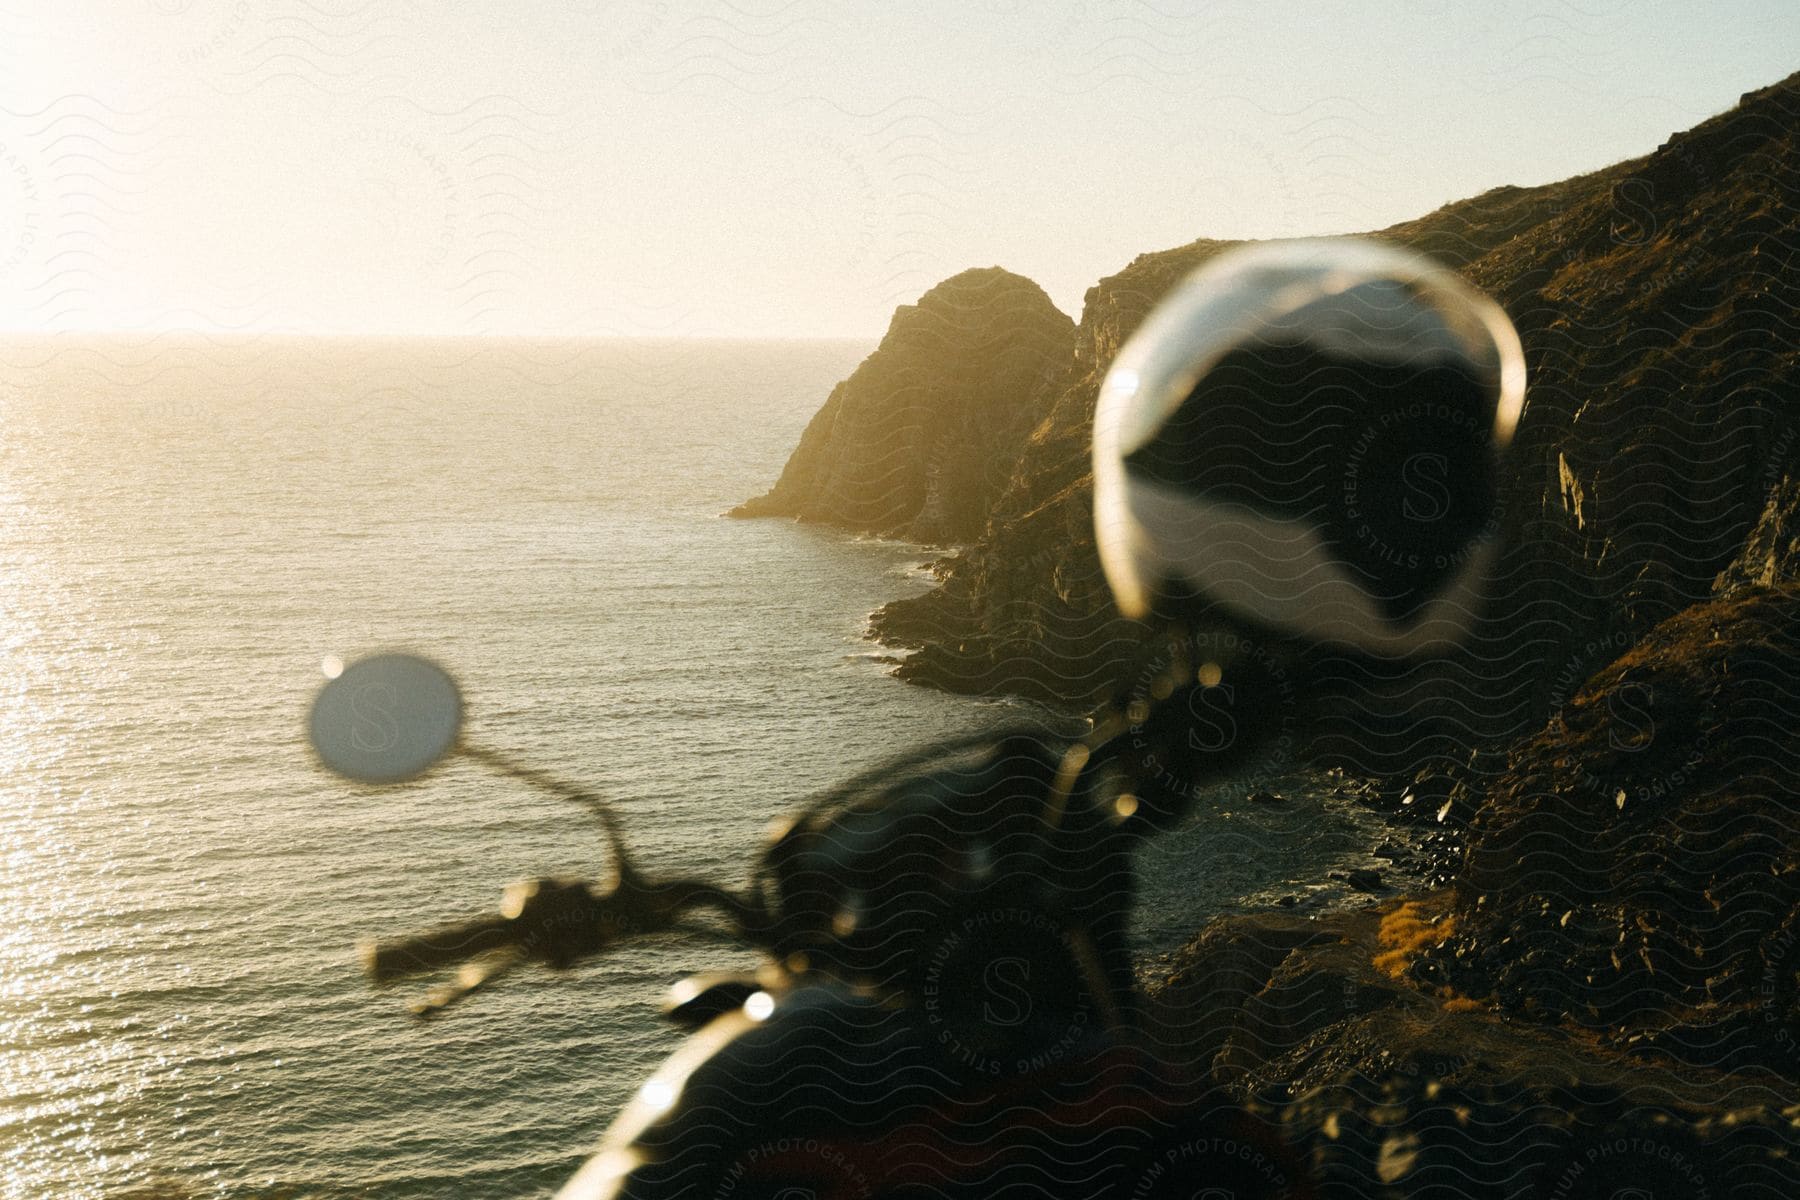 A helmet on the handlebars of a parked motorcycle overlooking oceanside cliffs and coast